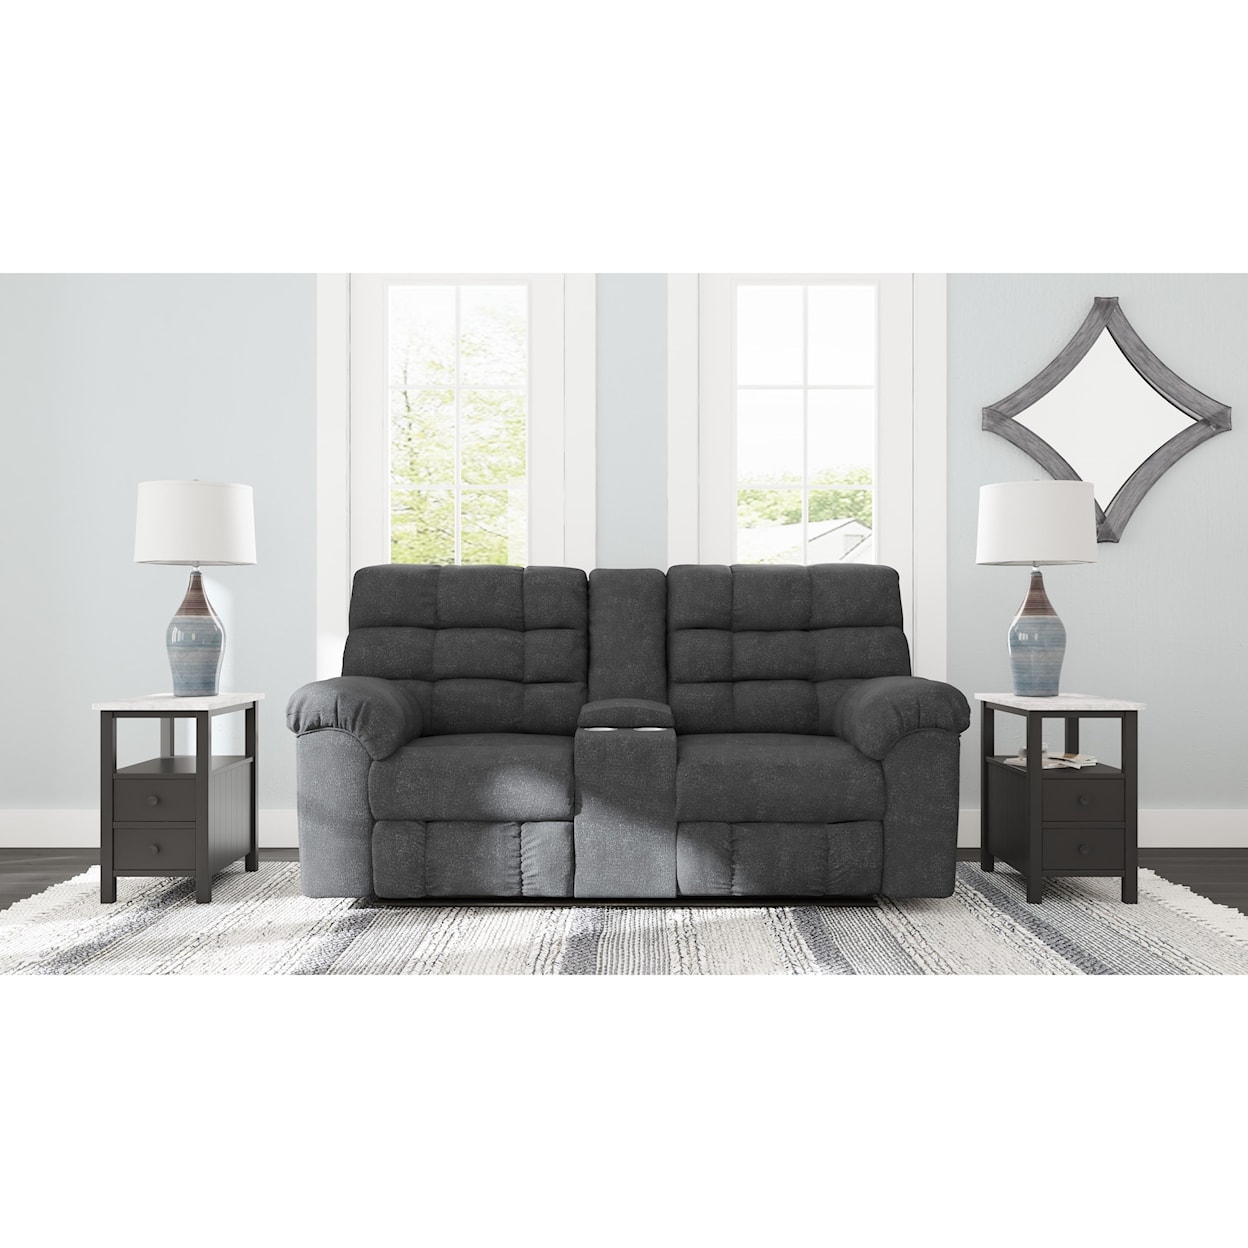 Benchcraft Wilhurst Double Reclining Loveseat w/ Console